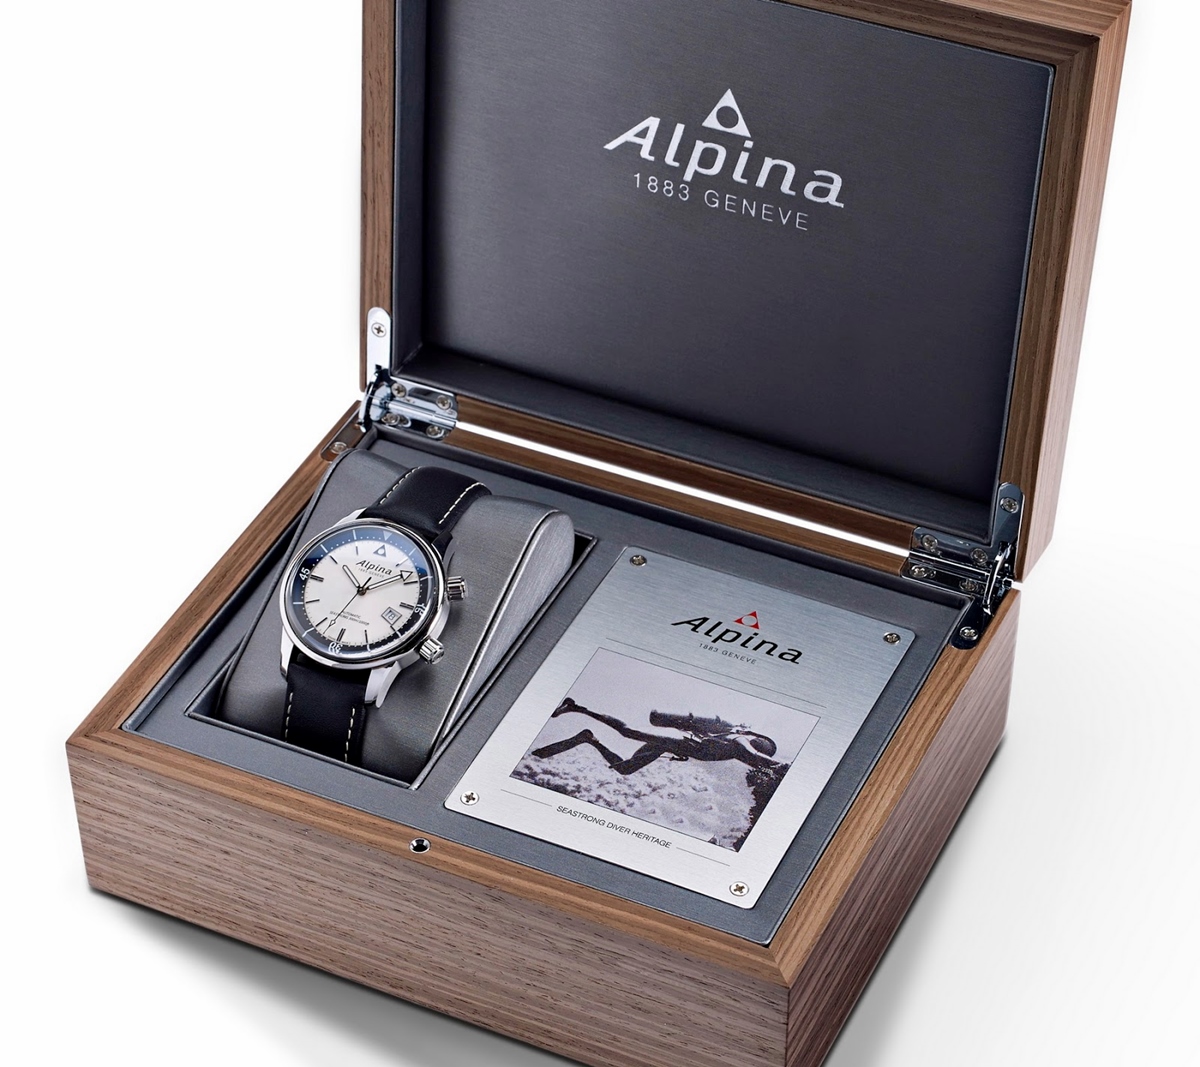 ALPINA Seastrong Diver Heritage